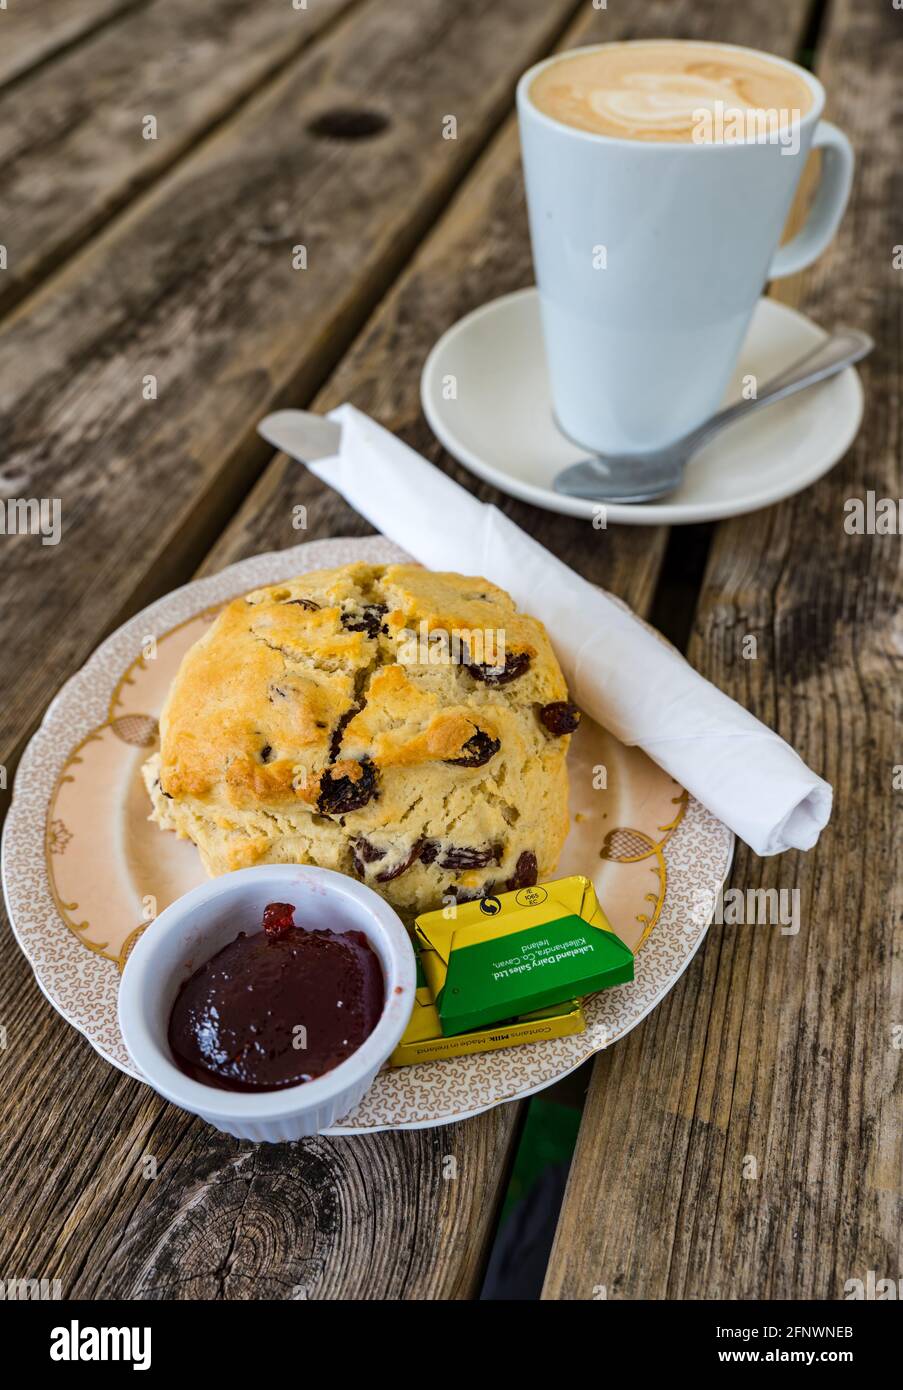 Homemade fruit scone with jam and butter on plate served on outdoor cafe table with latte mug of coffee Stock Photo